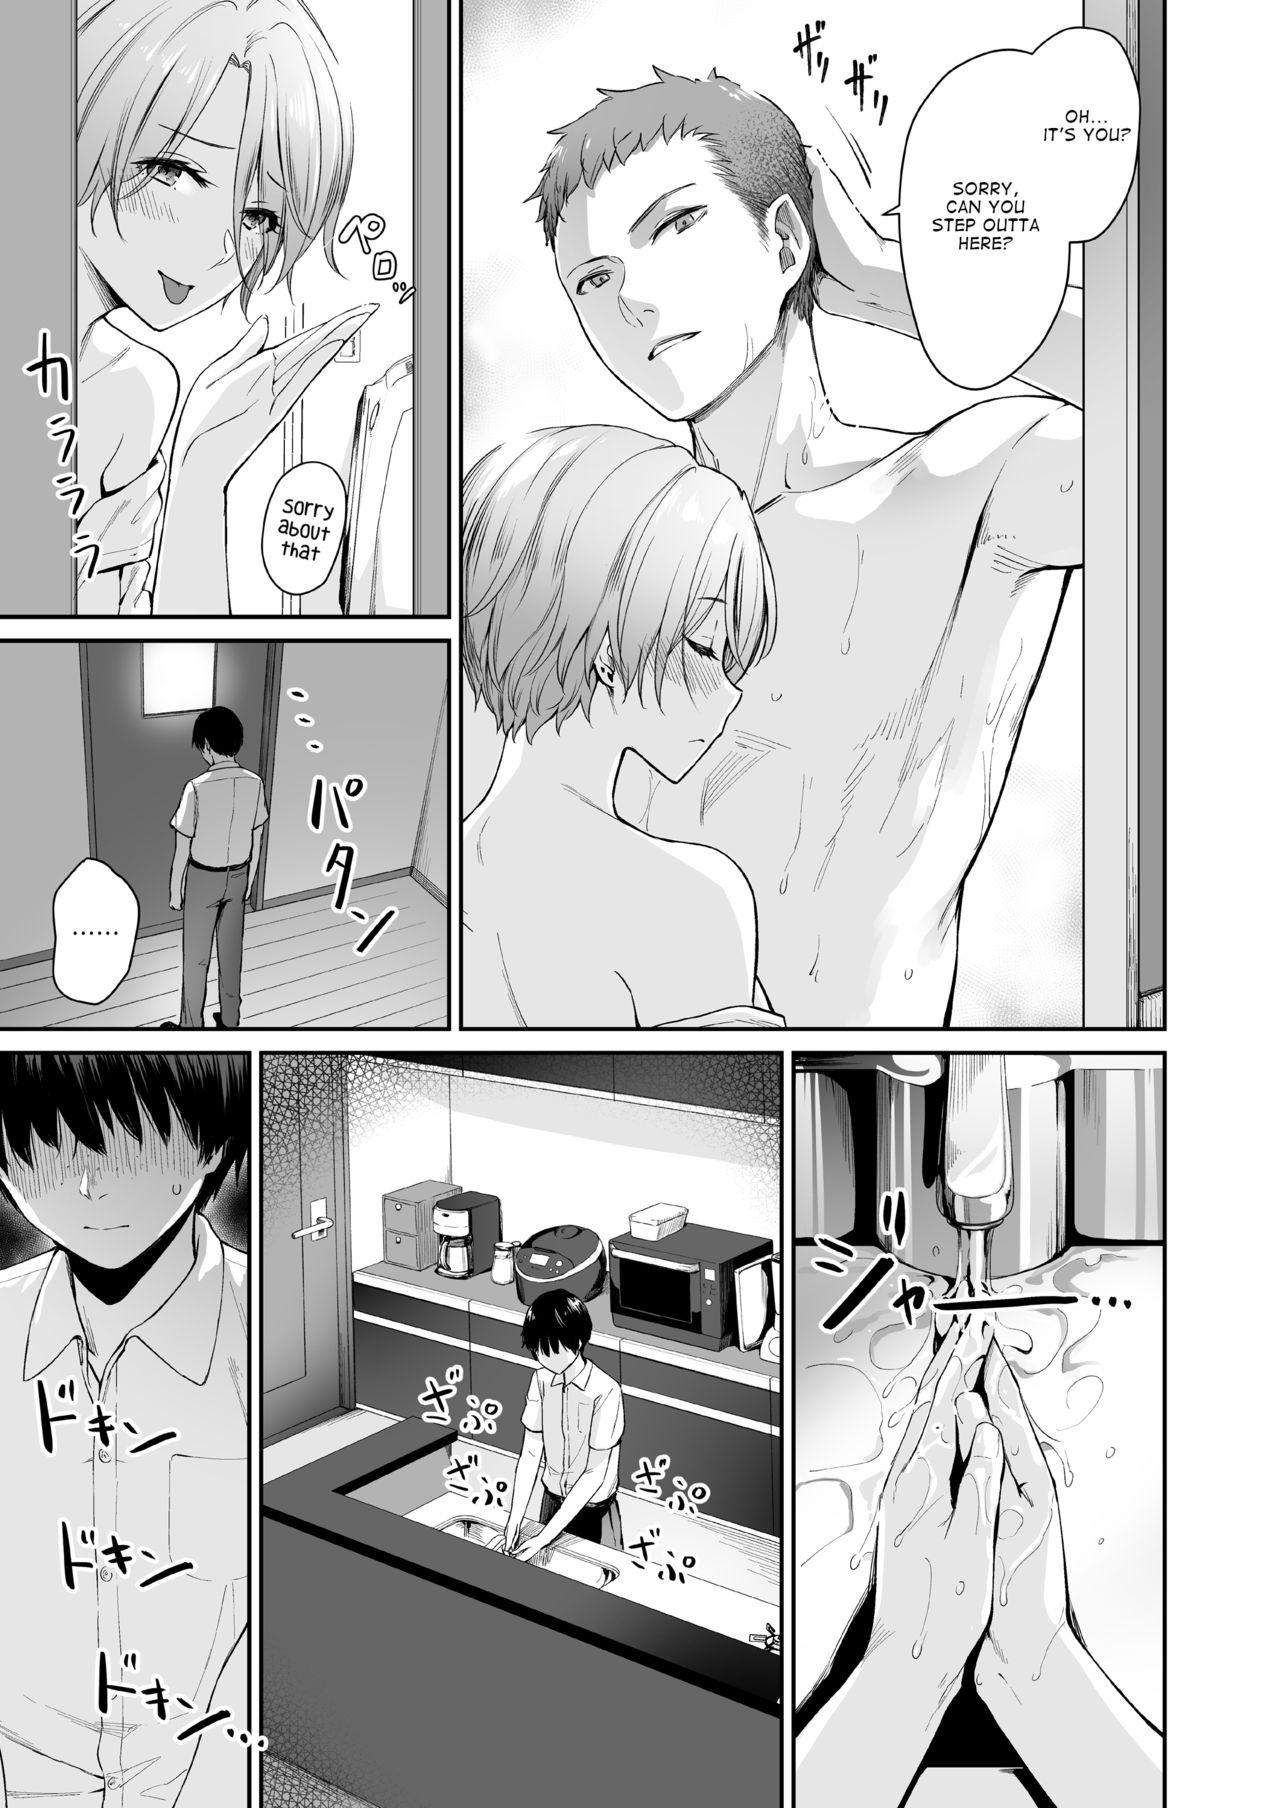 Tiny Tits Zoku Boku dake ga Sex Dekinai Ie | I‘m the Only One That Can’t Get Laid in This House Continuation - Original Shaved Pussy - Page 12